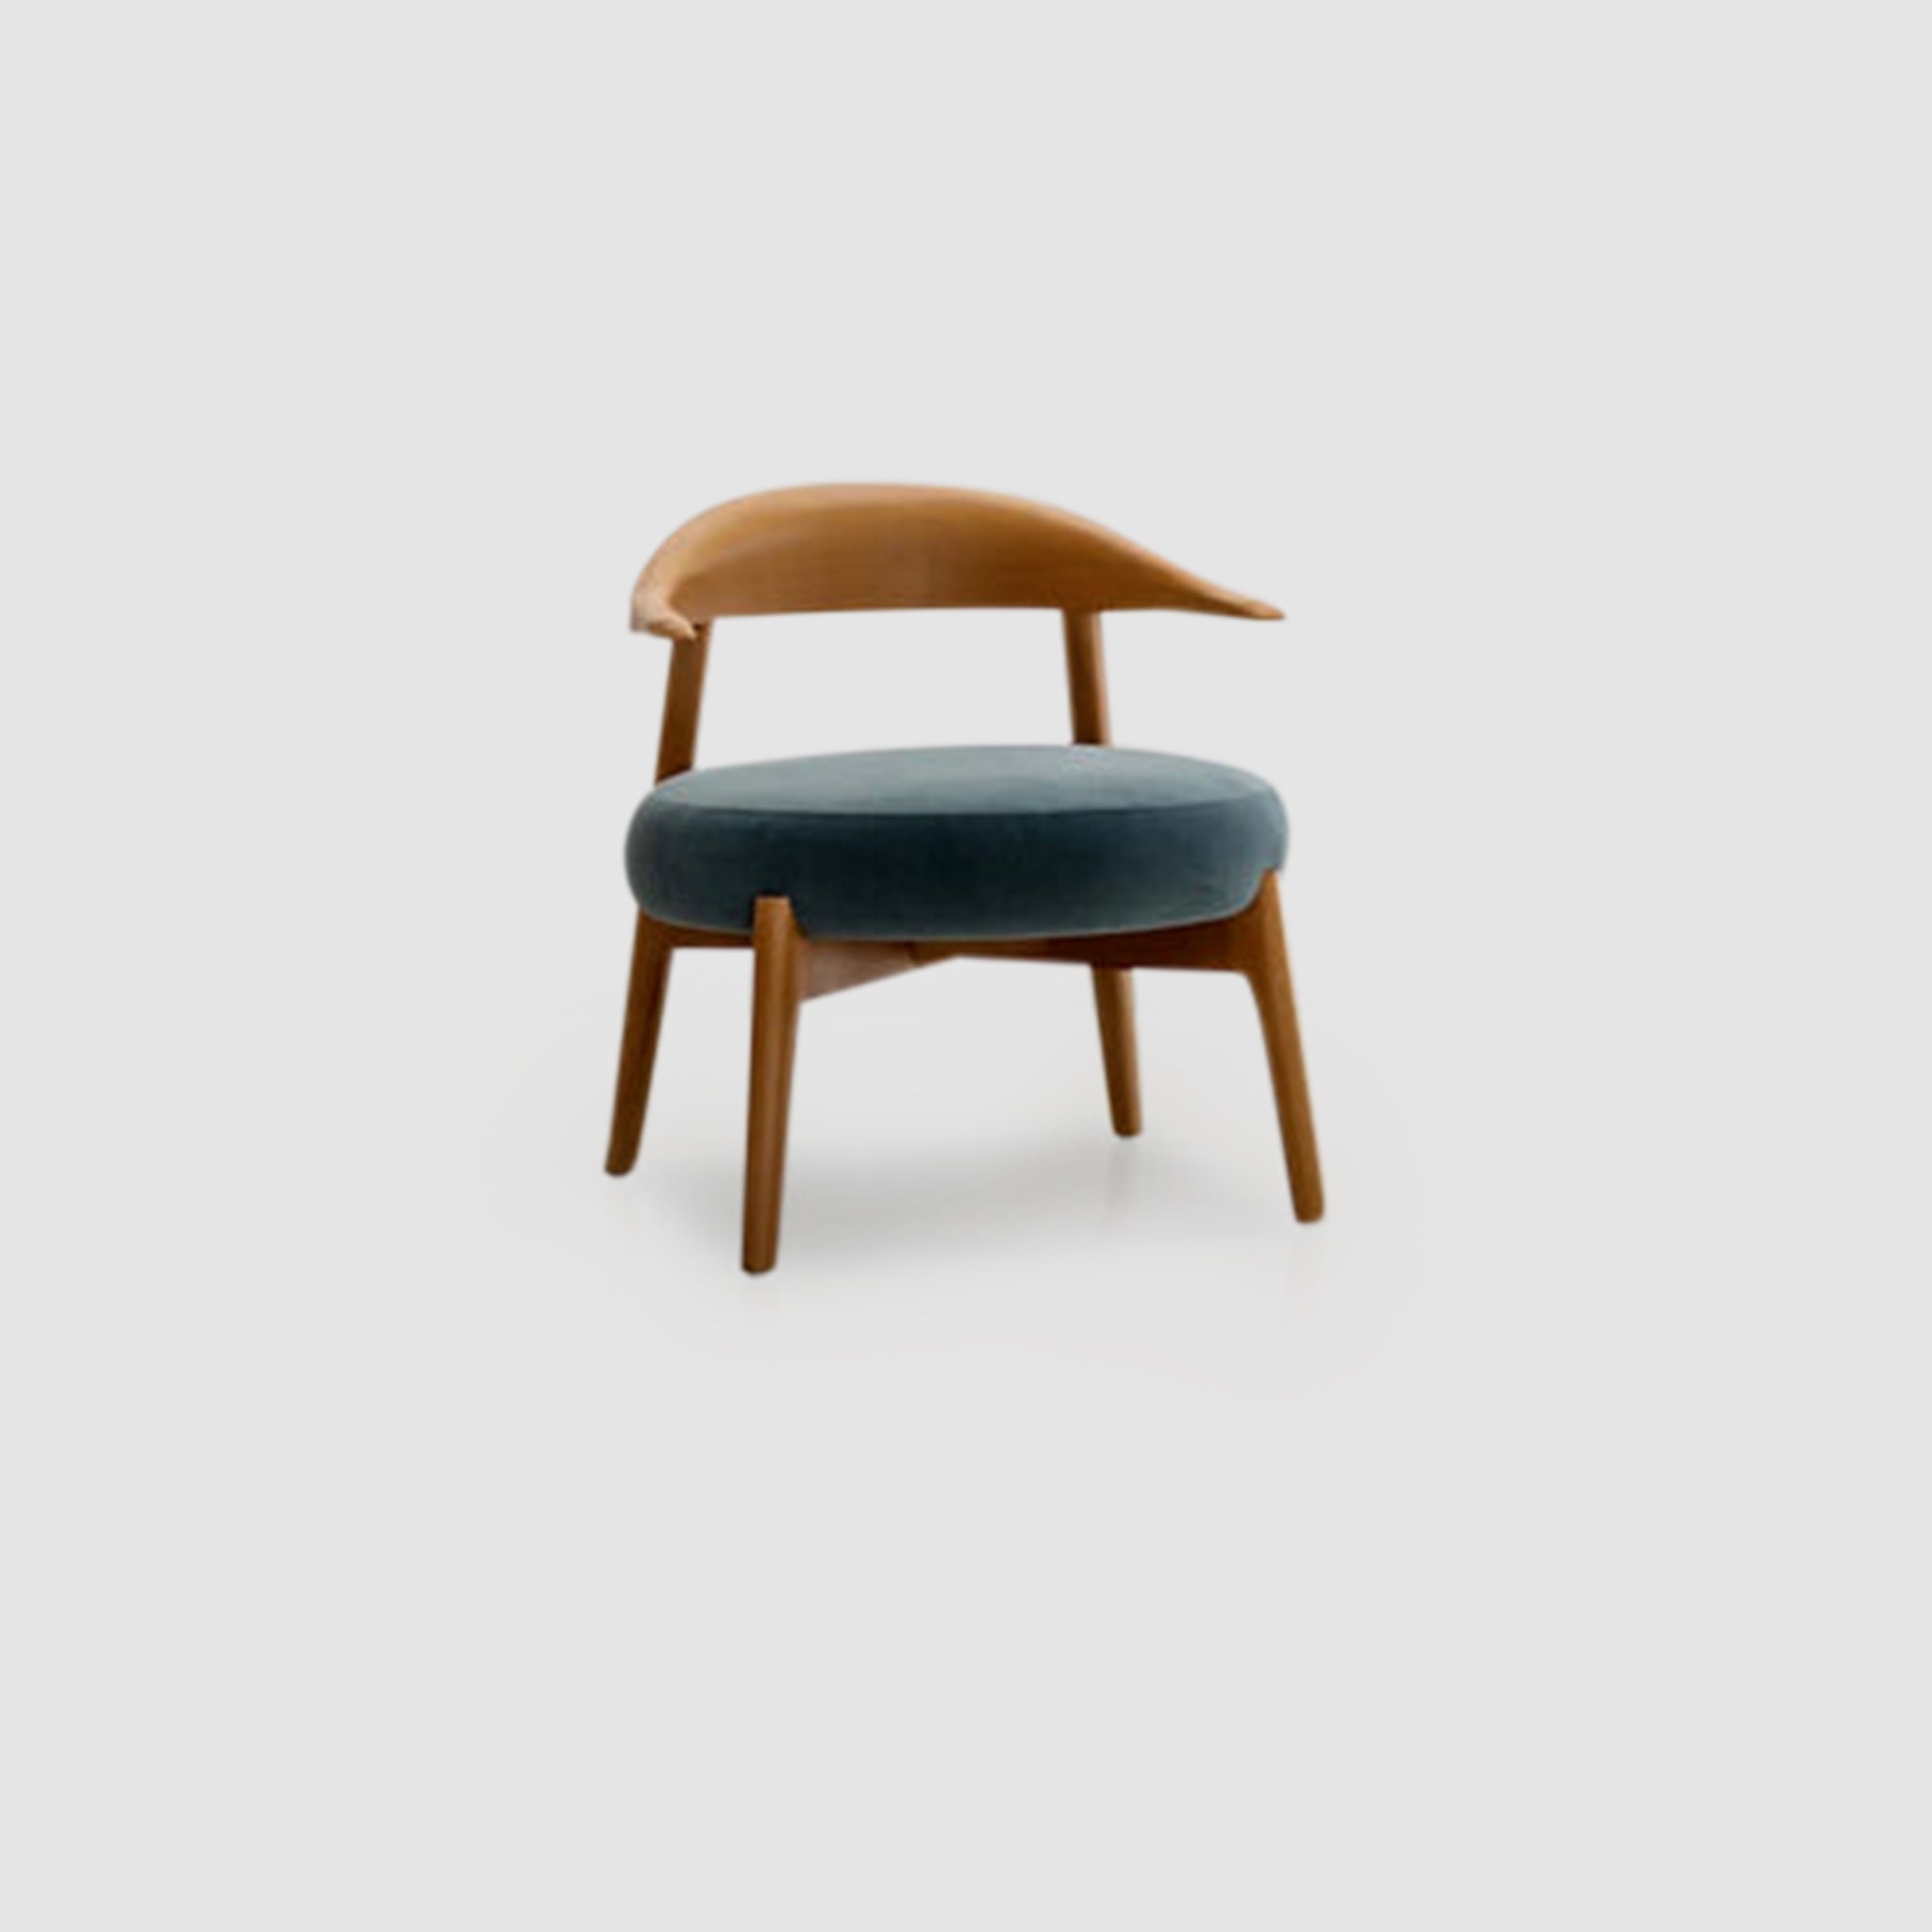 "The Hyde Accent Chair with sleek wooden curves and plush blue seat"